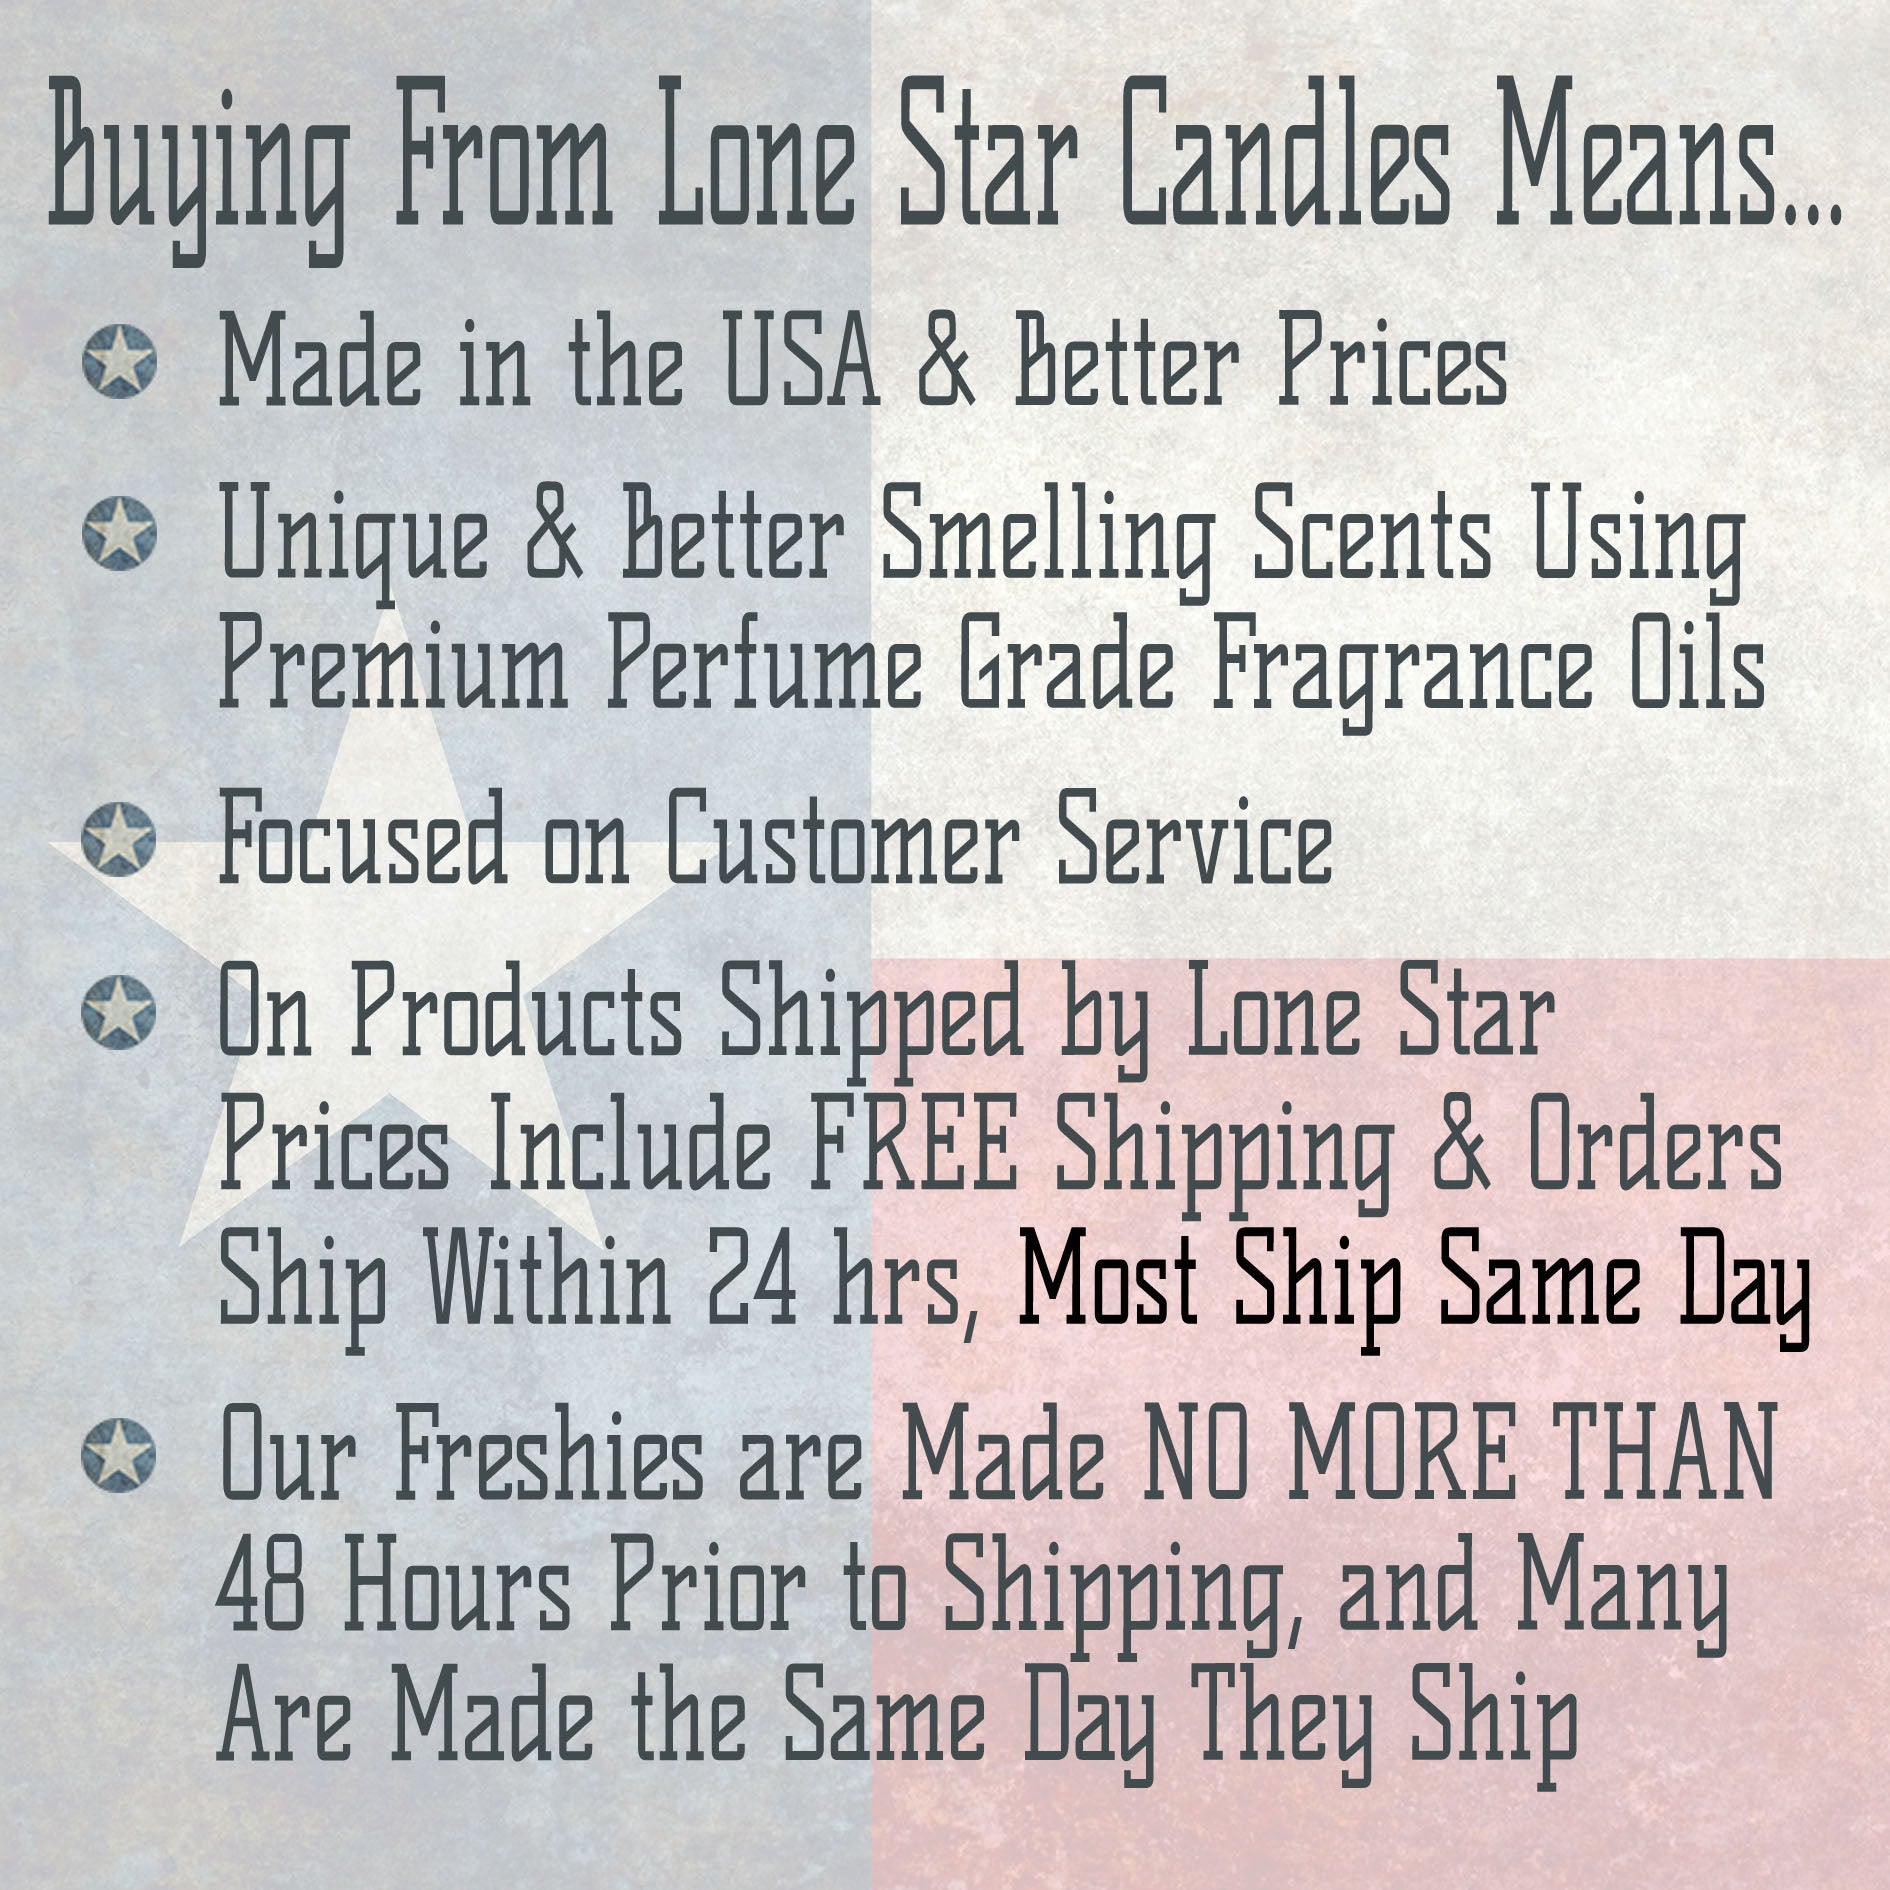 Cranberries & Sandalwood, Lone Star Candles & More's Premium Strongly Scented Freshies, A Delightful Mix of Spiced Cranberry, & Sandalwood, Car & Air Freshener, USA Made in Texas, Apple 1-Pack